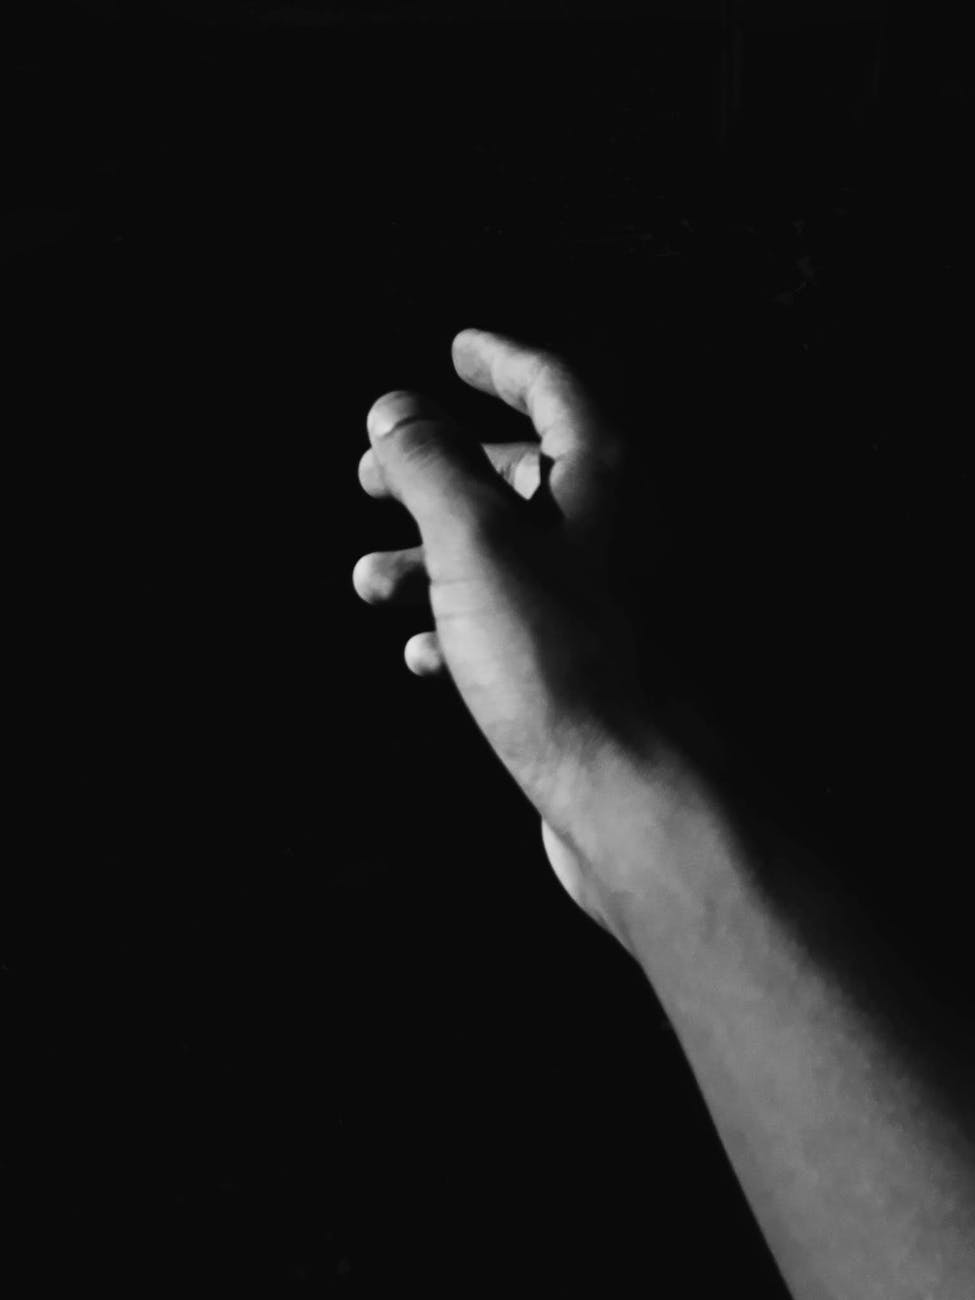 grayscale photo of hand reaching out against black background